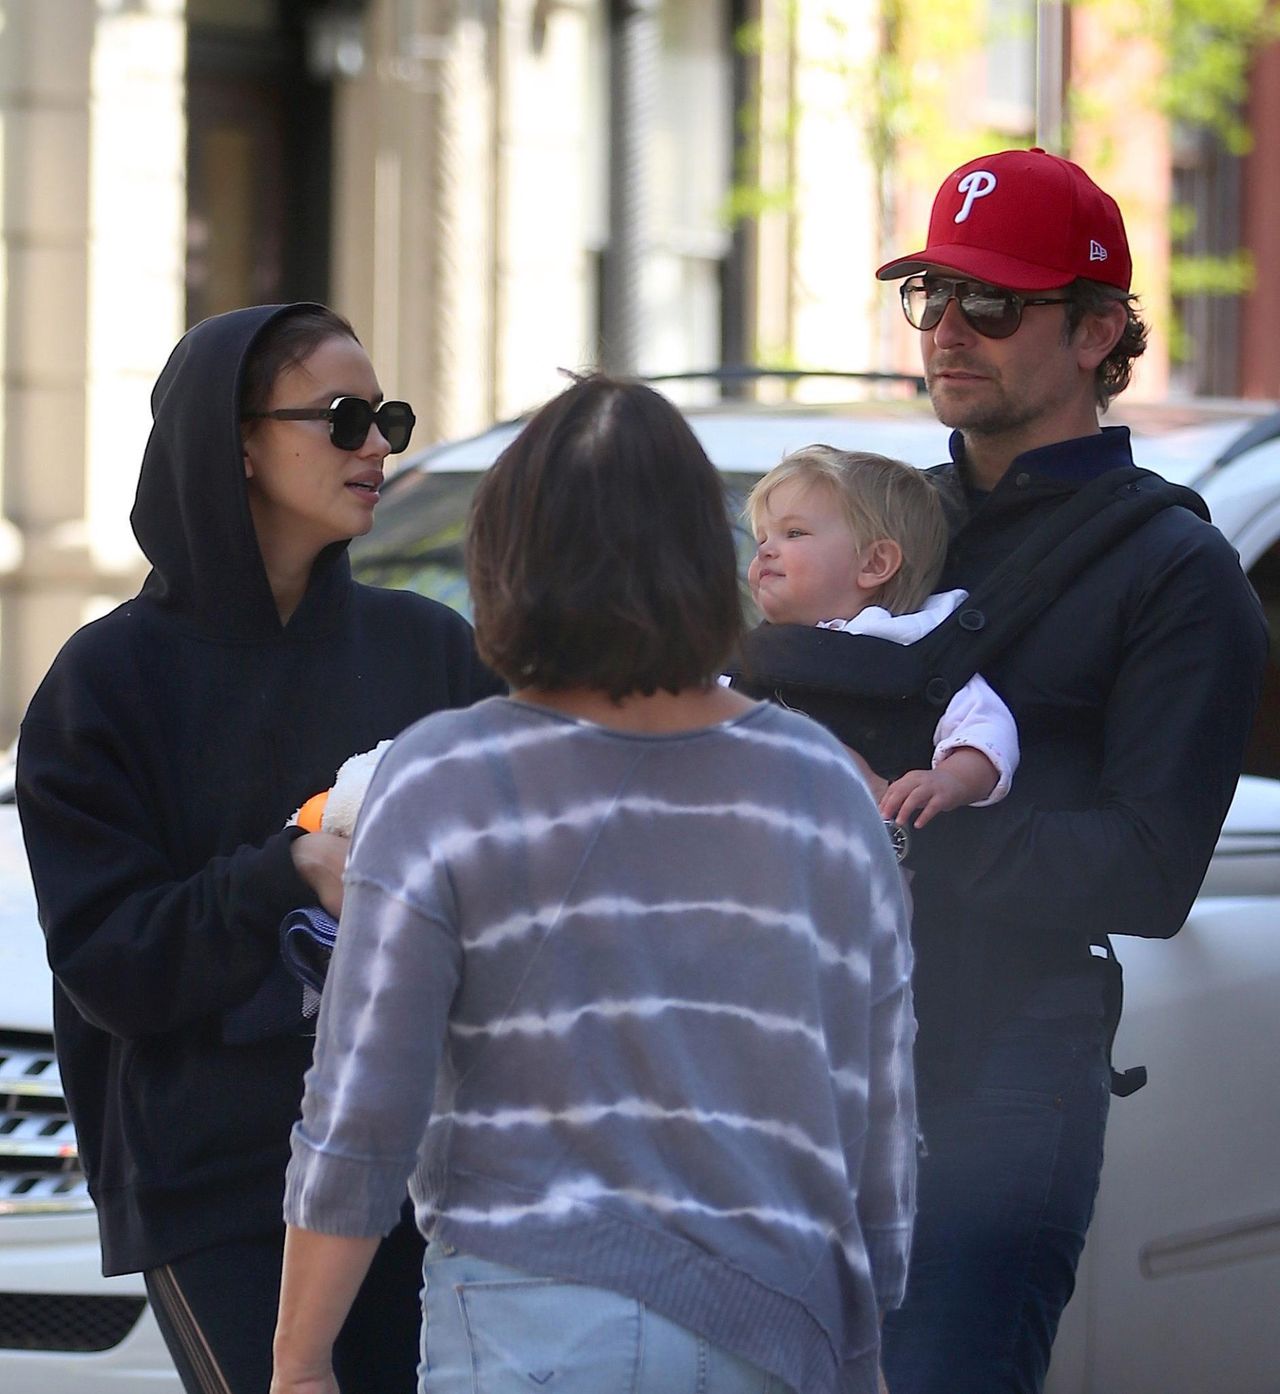 No crédit - BI - Exclusif - Bradley Cooper et sa compagne Irina Shayk se baladent avec leur fille Lea dans le quartier de West Village à New York, le 1er mai 2018 For germany call for price
No credit - BI - Exclusive - Bradley Cooper and his girlfriend Irina Shayk are seen with their daughter Lea walking around West Village, they went to play with their daughter in the playground, in New York City, on May 1st 2018